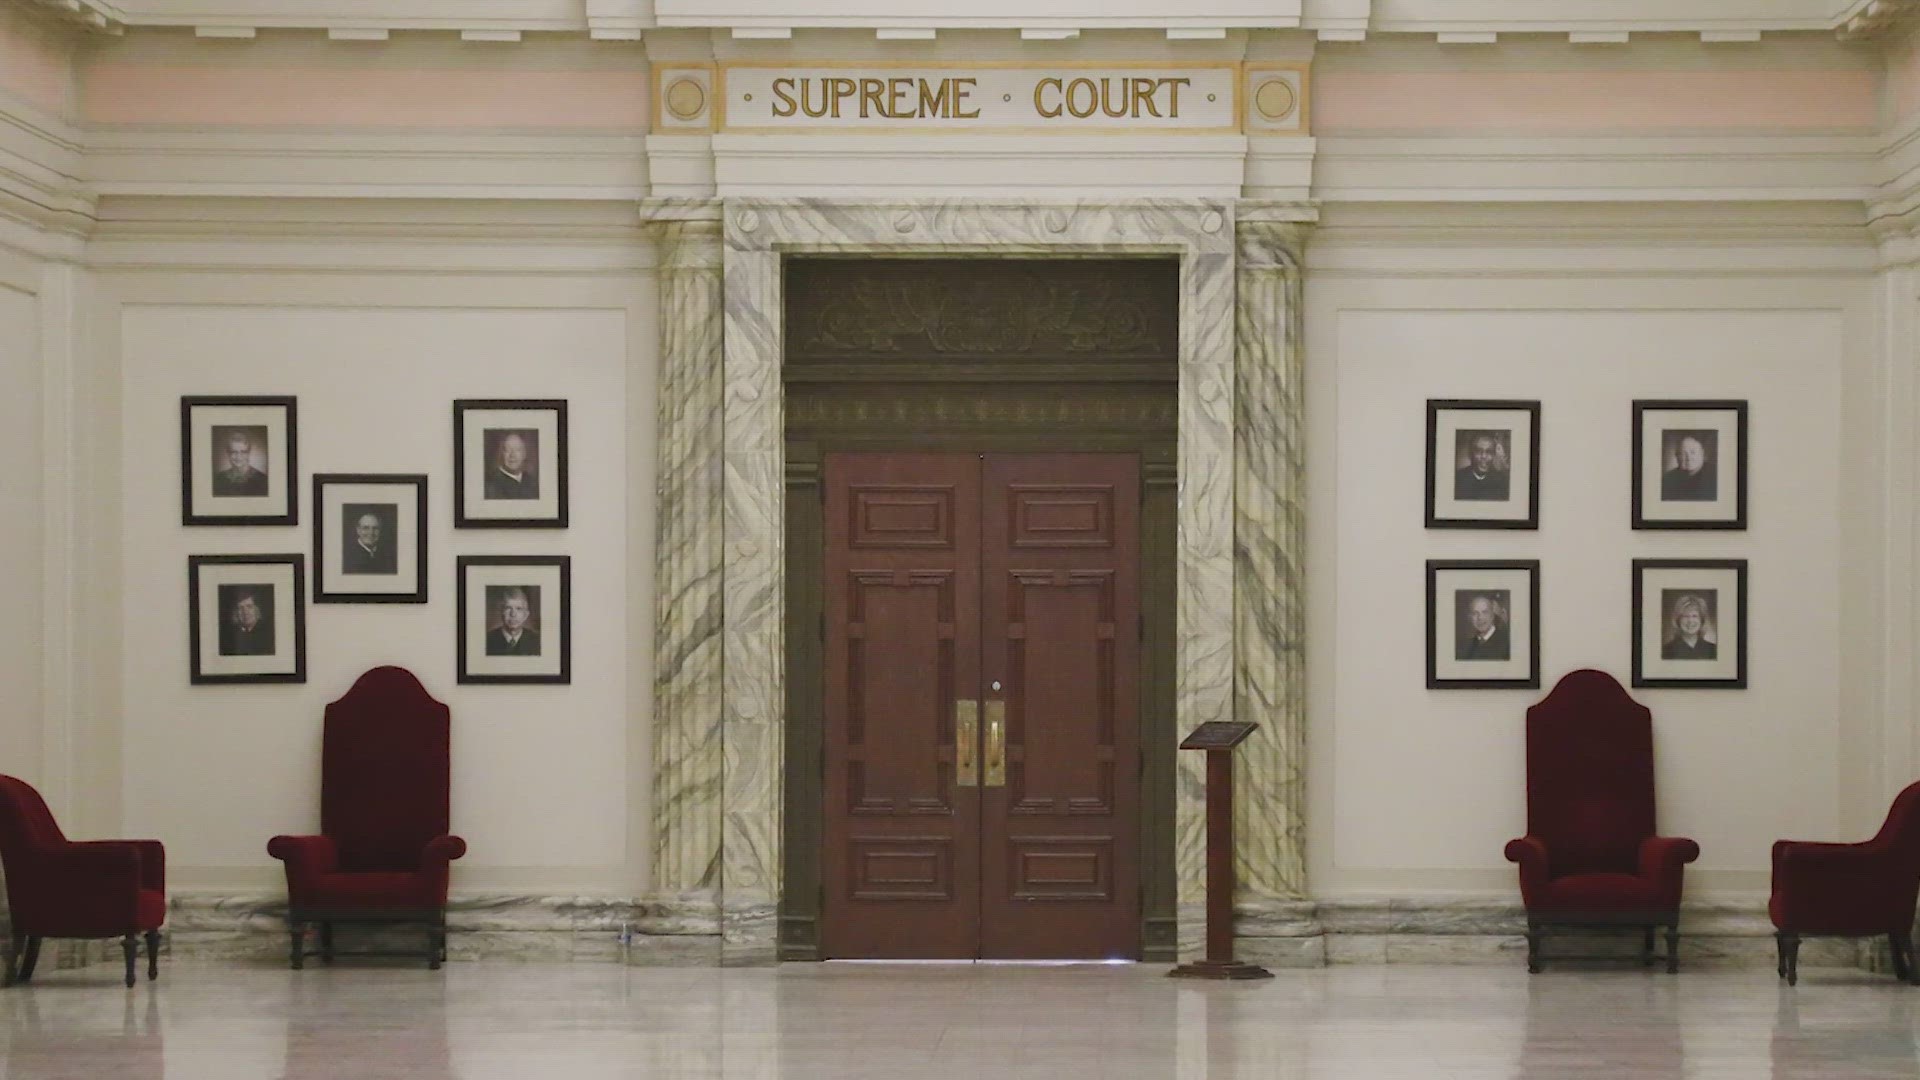 The Texas Supreme Court will hear arguments for and against SB 14, which bans hormone therapies and puberty blockers from minors under the age of 18.